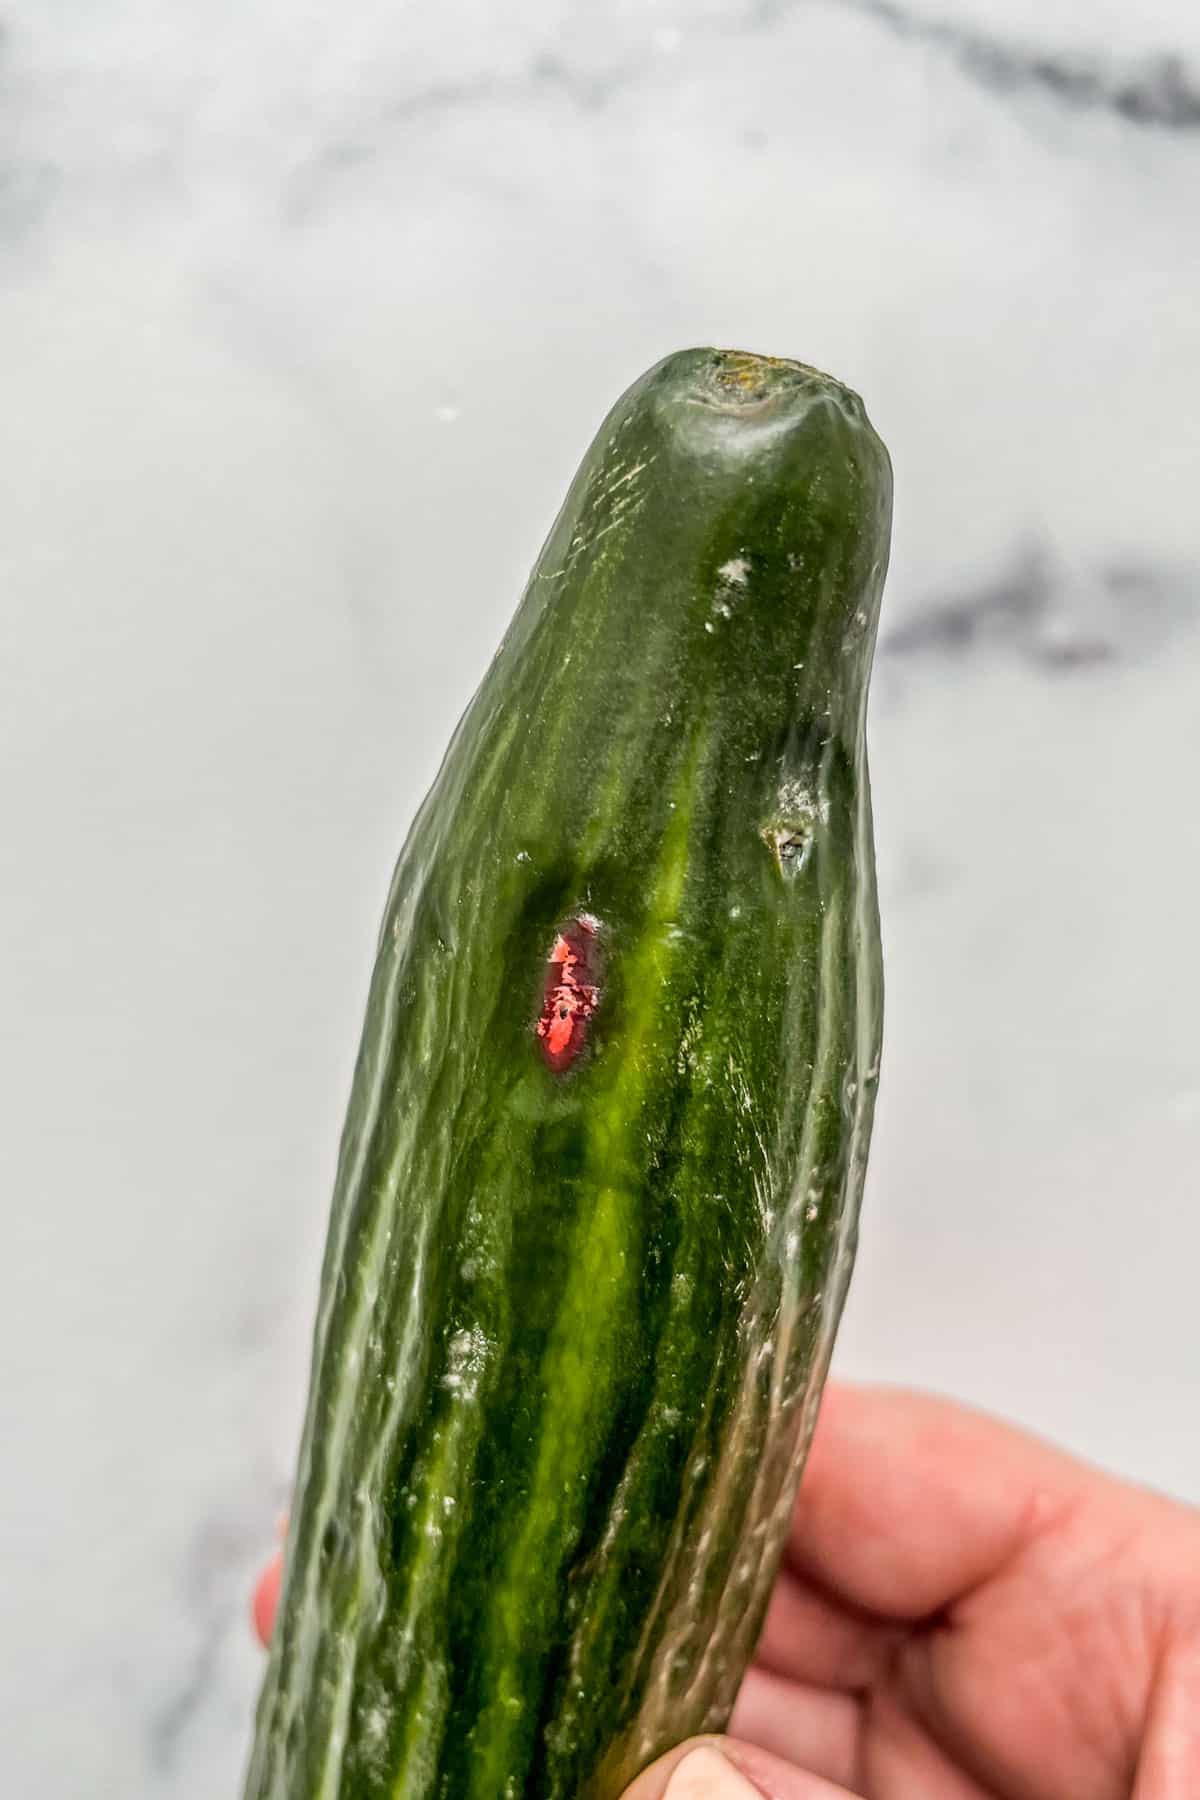 Cucumber with red mold.